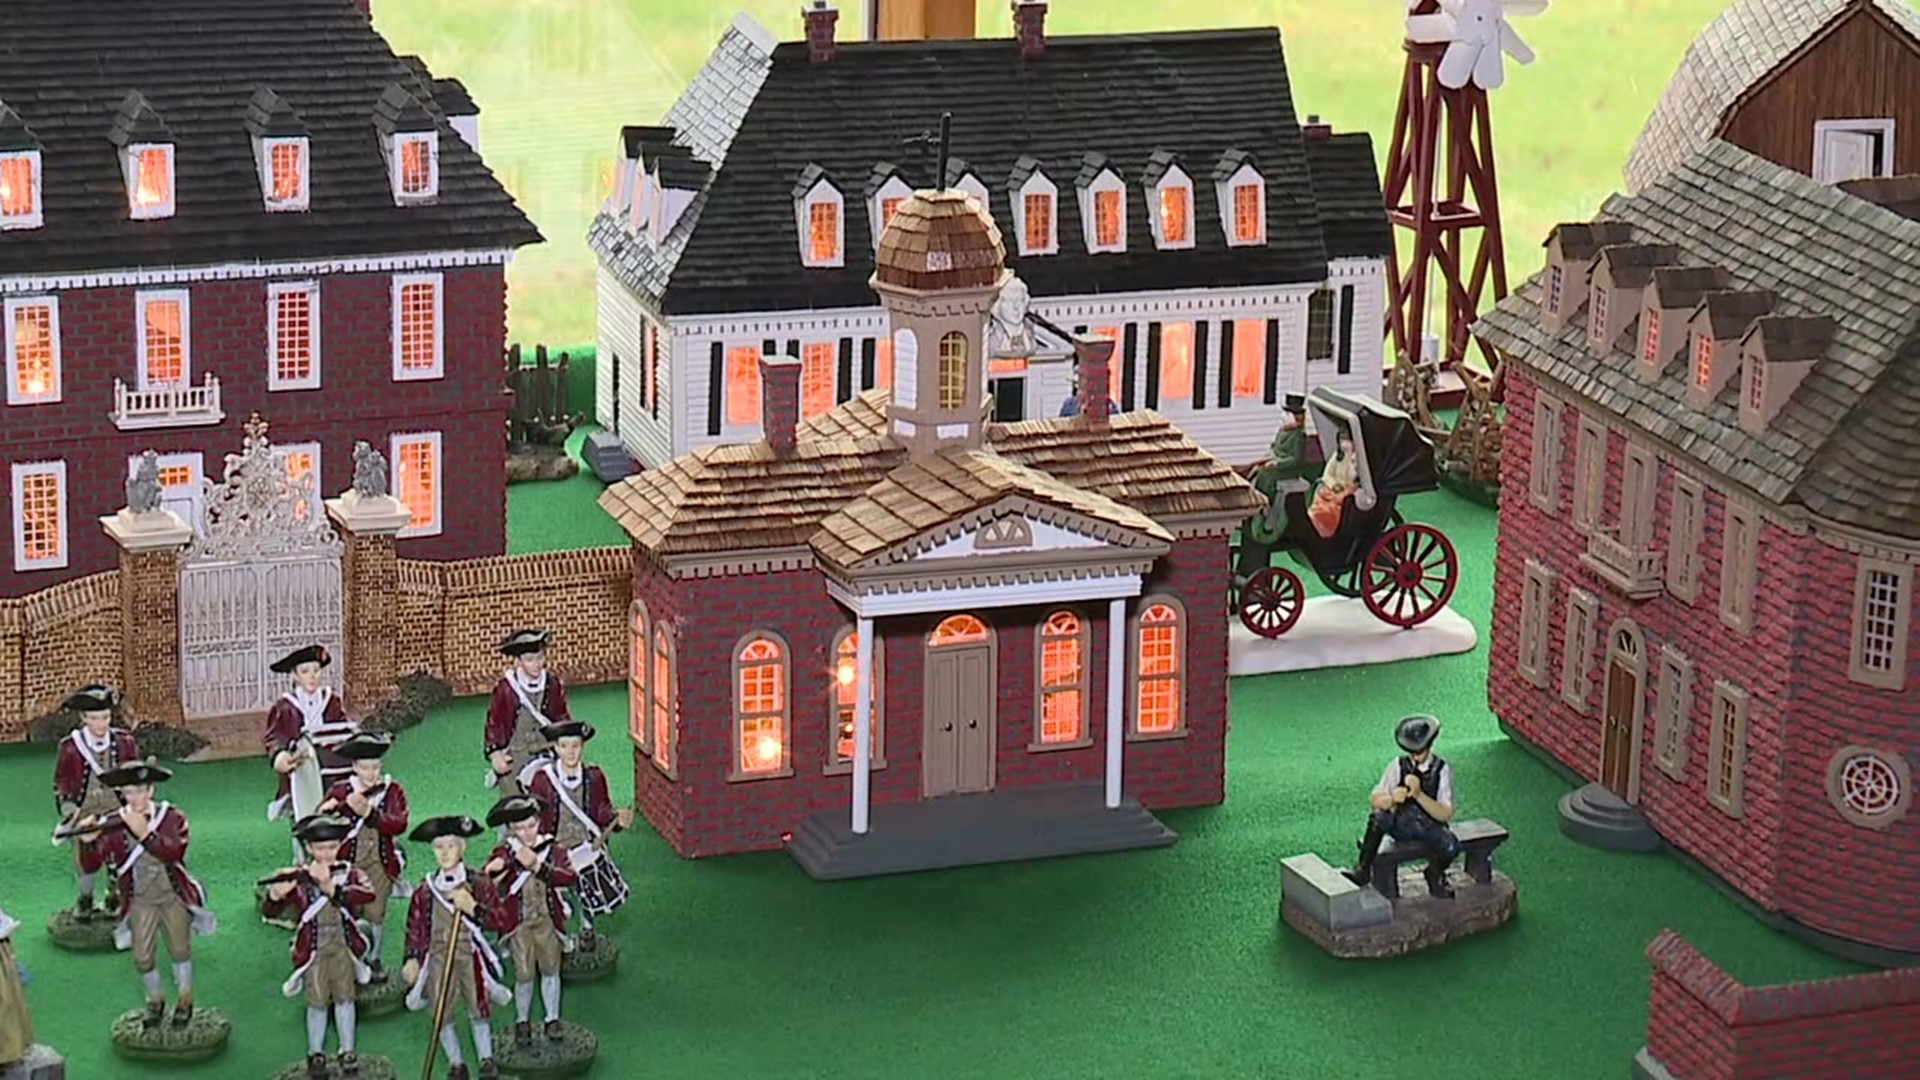 Eugene Dubinsky is creating a miniature colonial town in his living room, down to the smallest details.